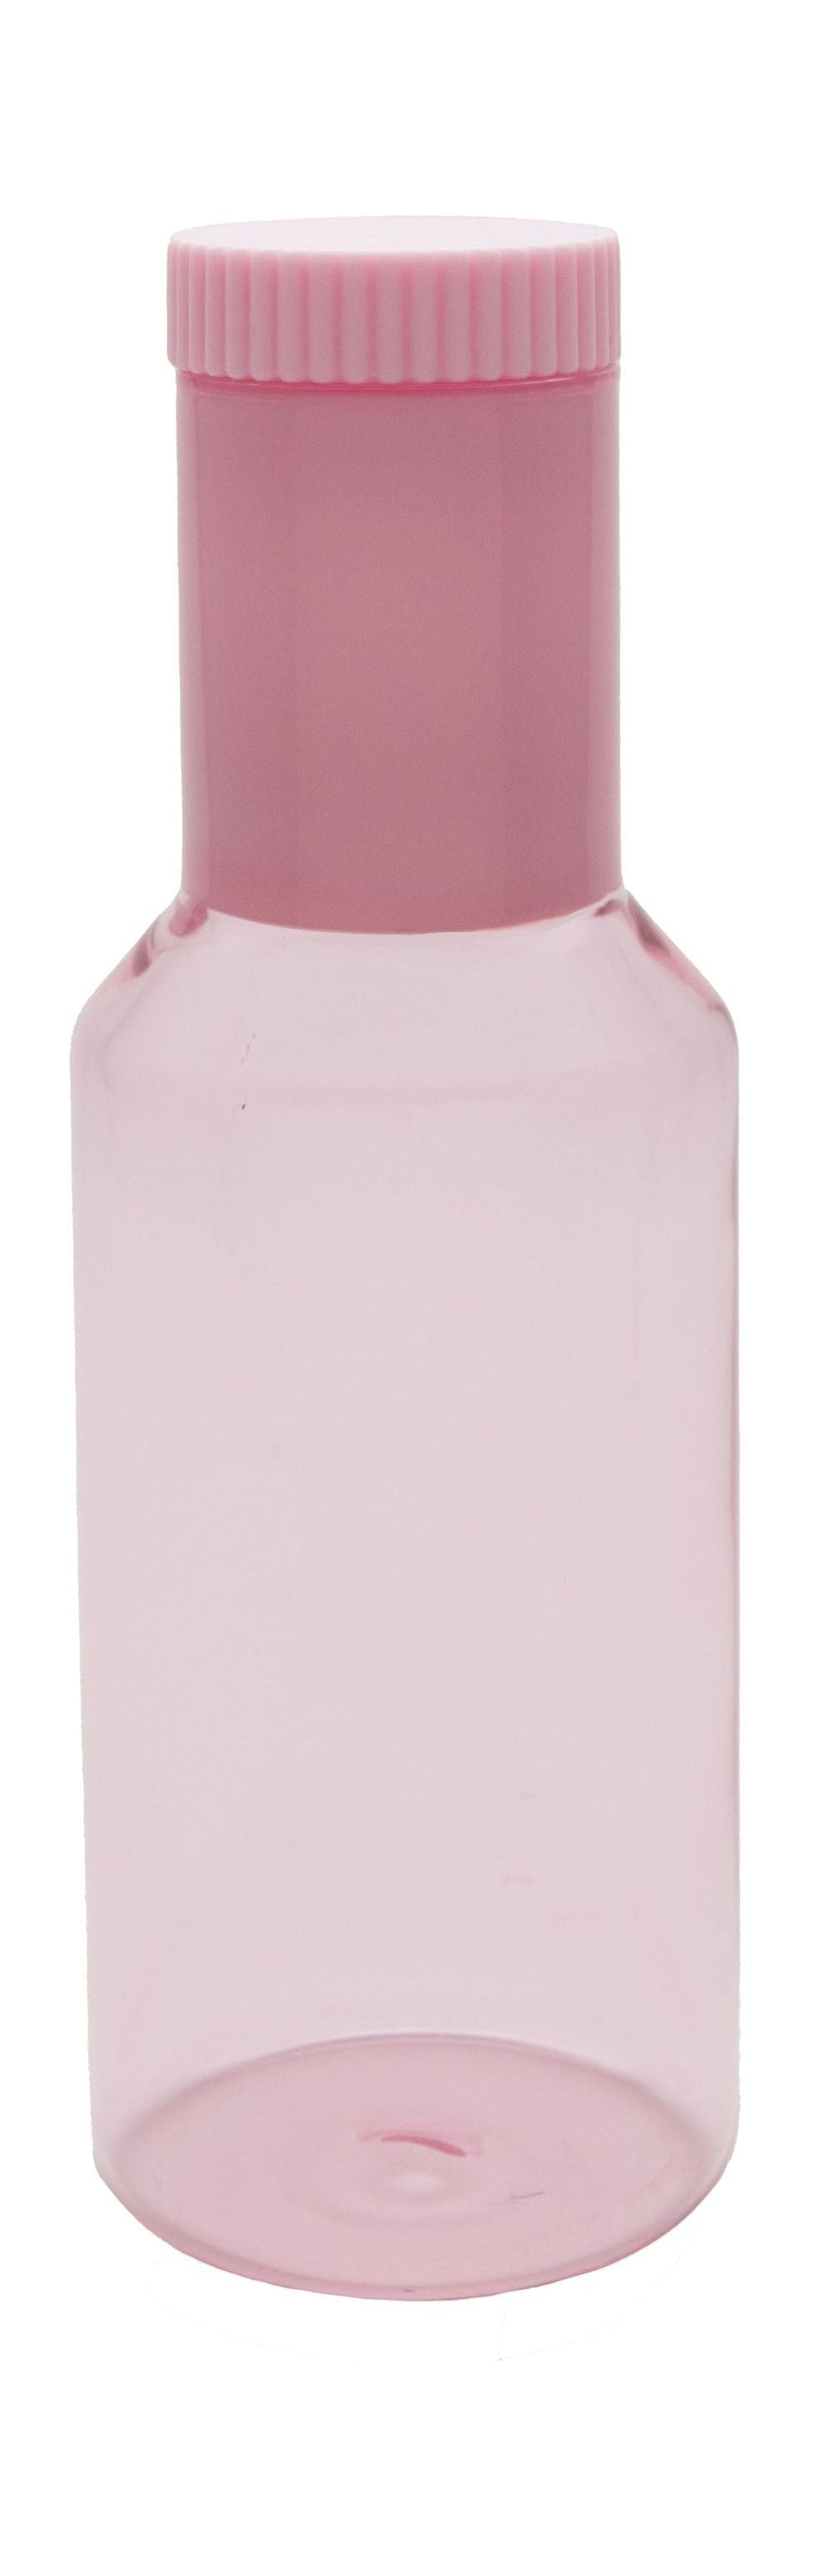 Design Letters Tube Carafe Made Of Glass, Pink/Milky Pink